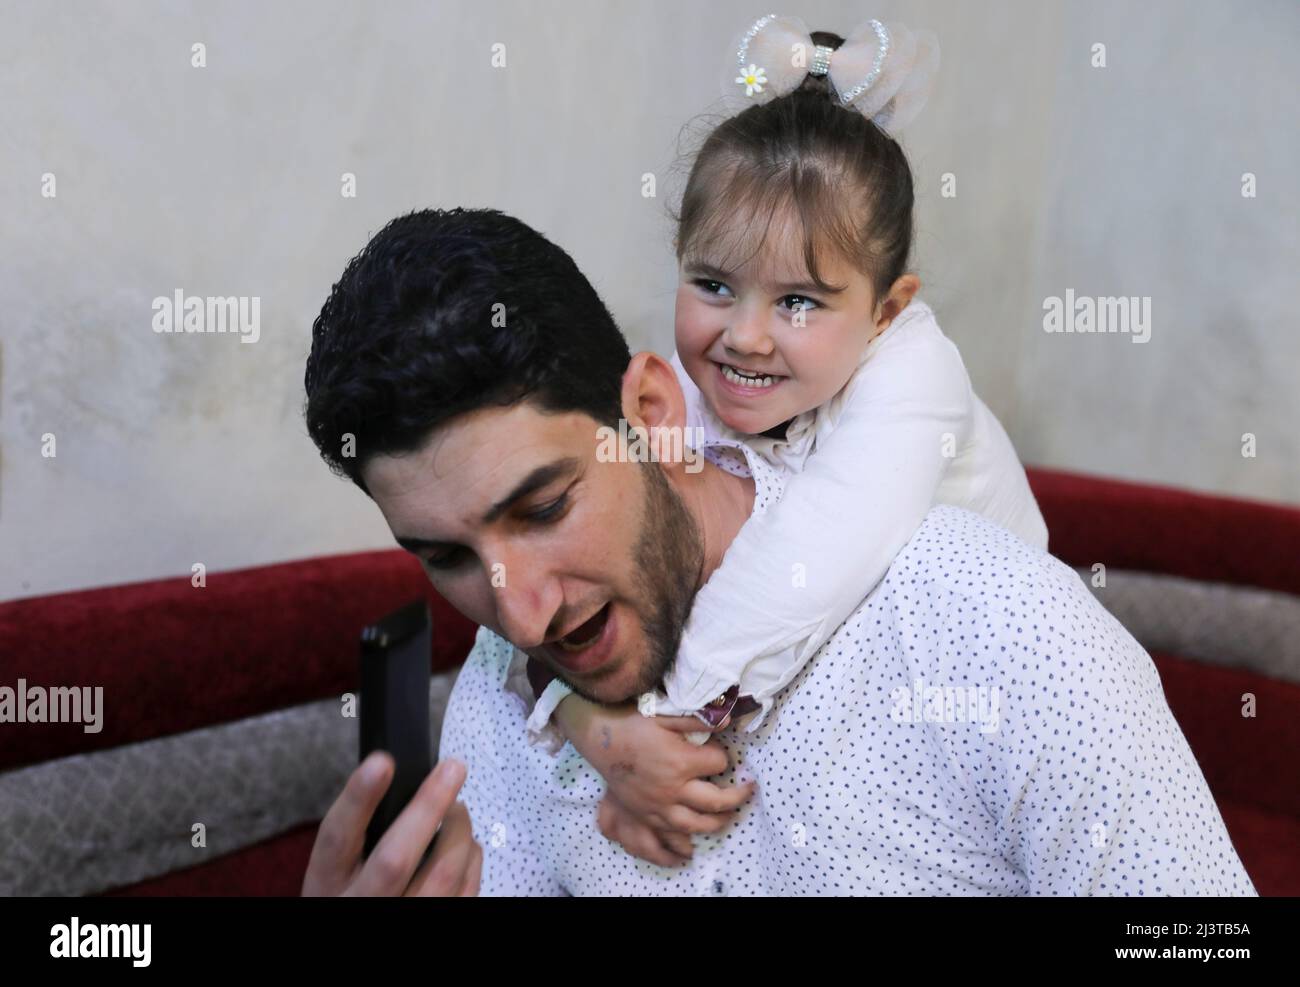 Abdel Hamid al-Youssef, an internally displaced man who says his wife and infant twins were killed when poison gas was dropped on their home town of Khan Sheikhoun in 2017, plays with his daughter, Aya, at their home in the rebel-held town of Sarmada in Idlib province, Syria April 1, 2022. Picture taken April 1, 2022. REUTERS/Khalil Ashawi Stock Photo